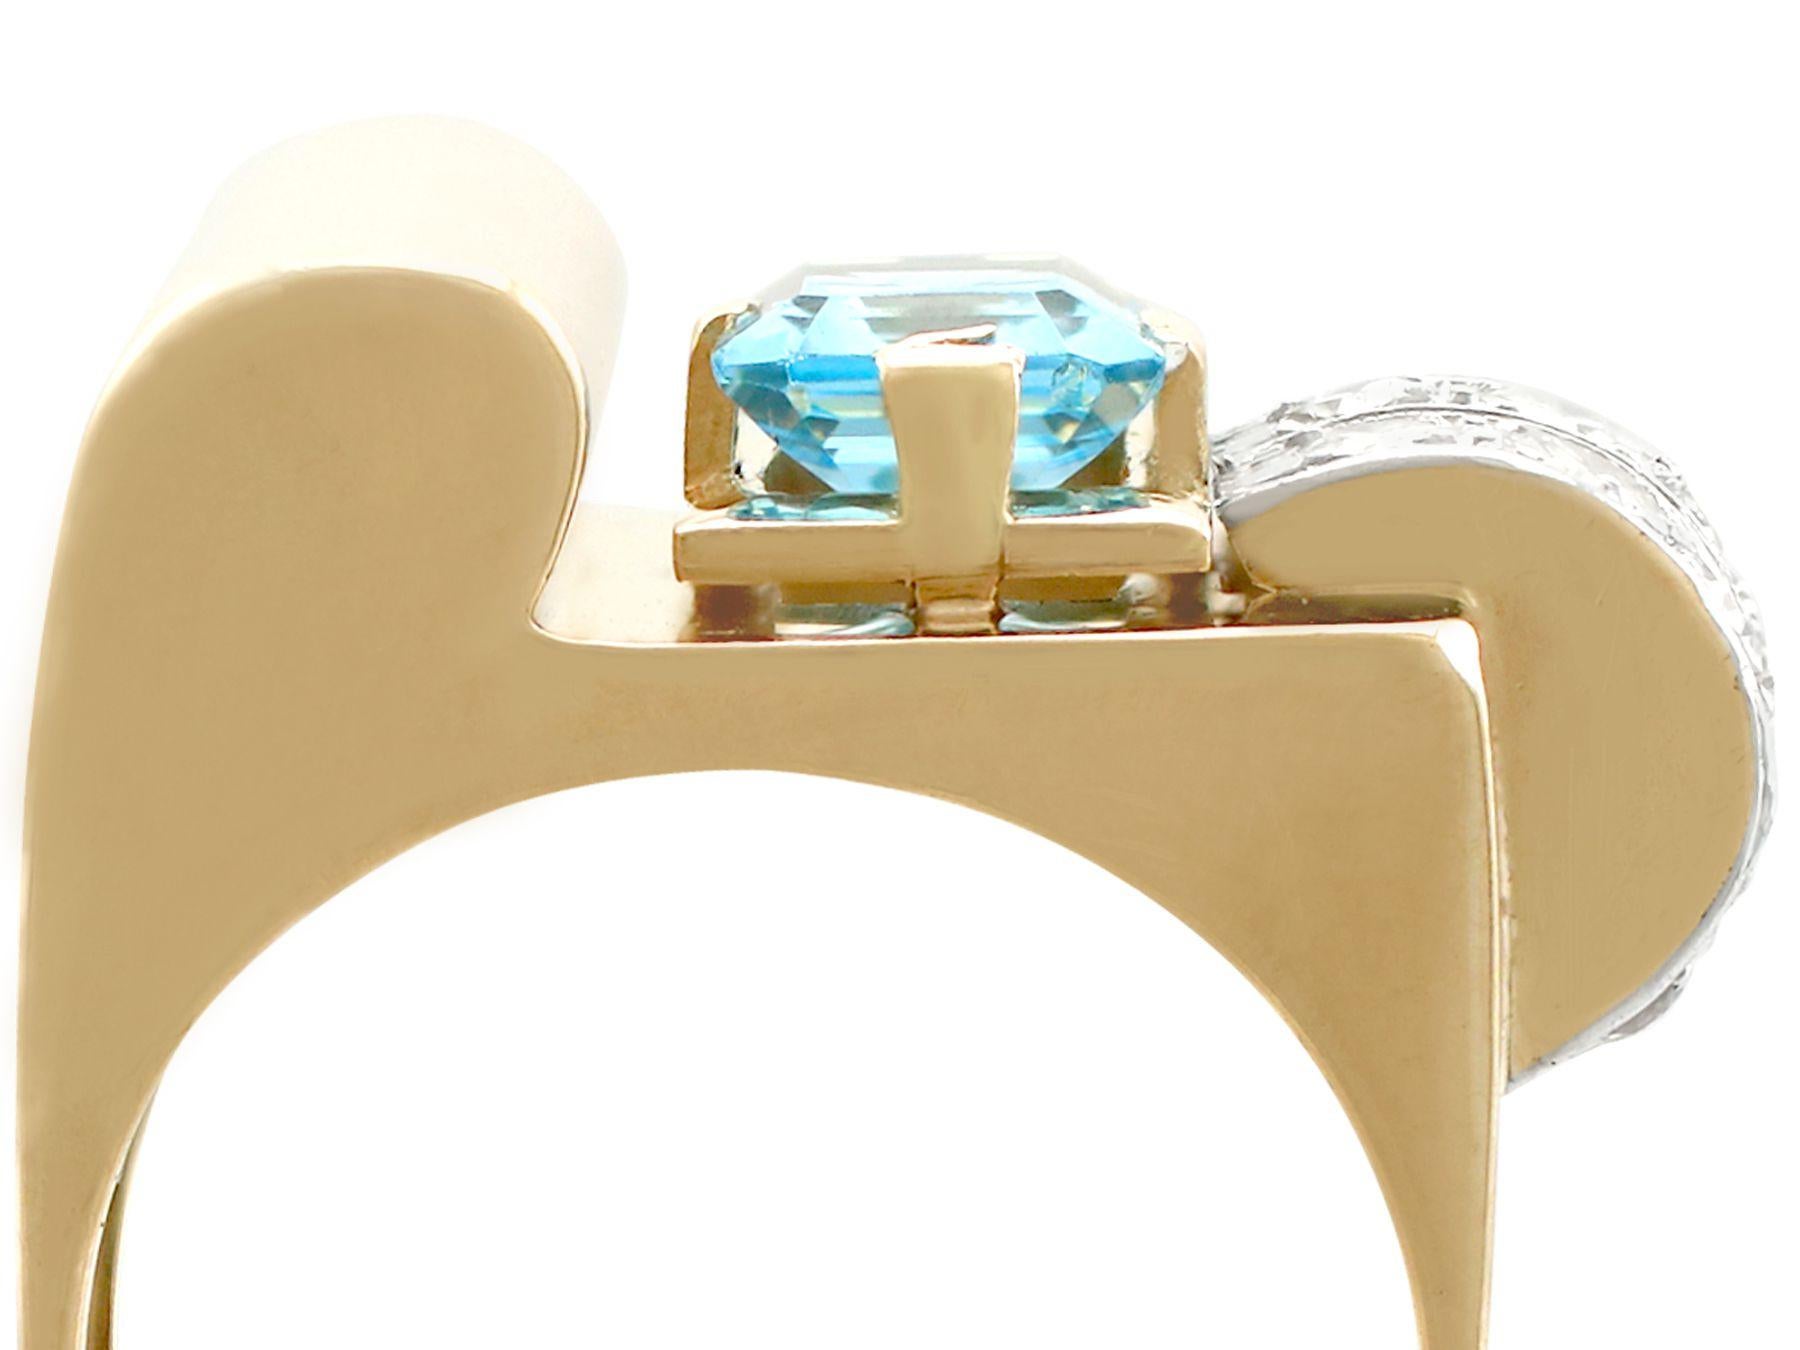 A stunning, fine and impressive antique 1.45 carat natural aquamarine and 0.30 carat diamond, 18 karat yellow gold, 18 karat white gold set dress ring in the Art Deco style; part of our antique jewelry/estate jewelry collections

This stunning